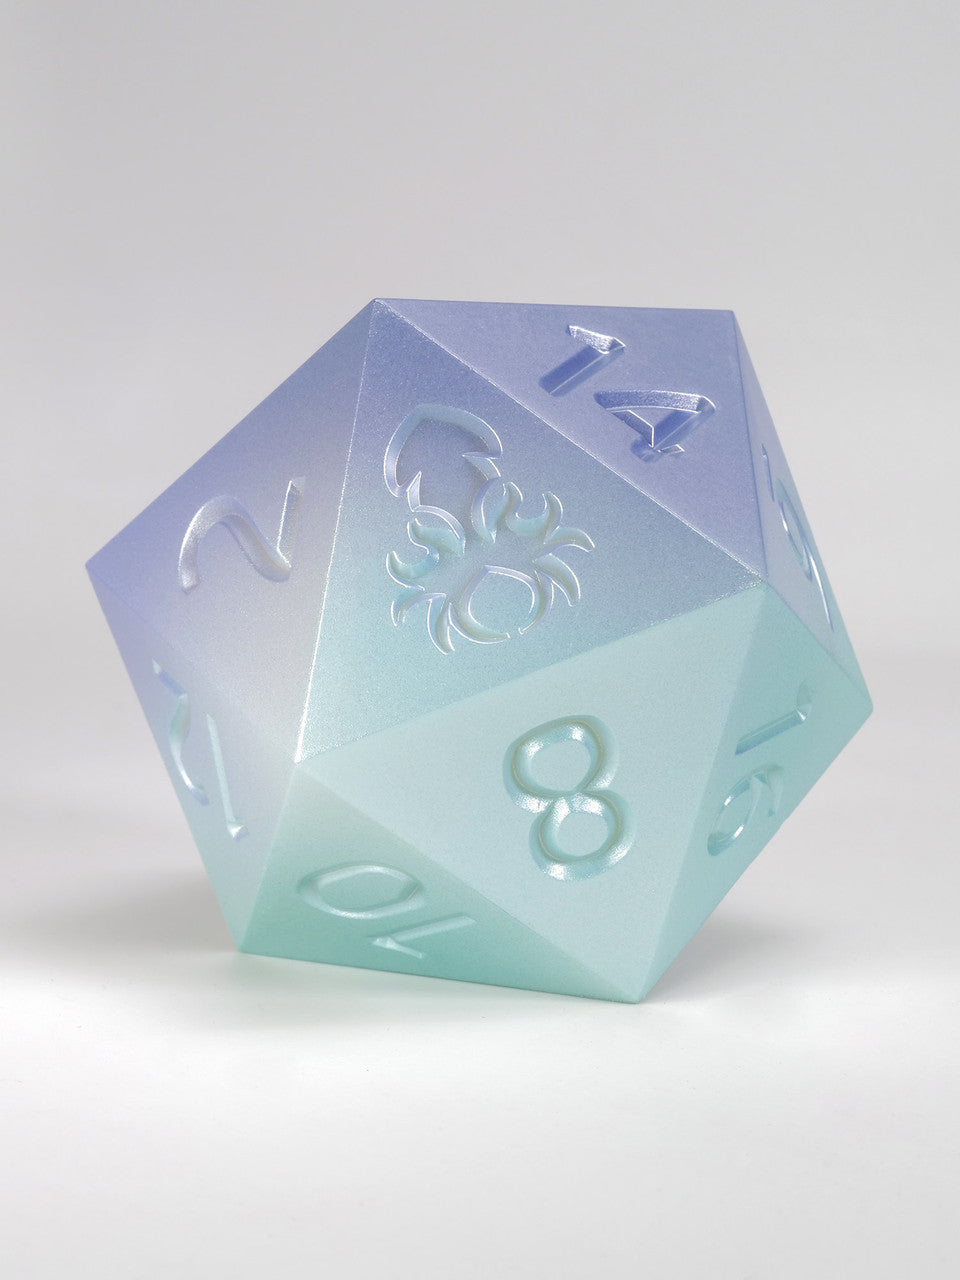 Ombre Aqua Teal to Periwinkle 55mm D20 Dice